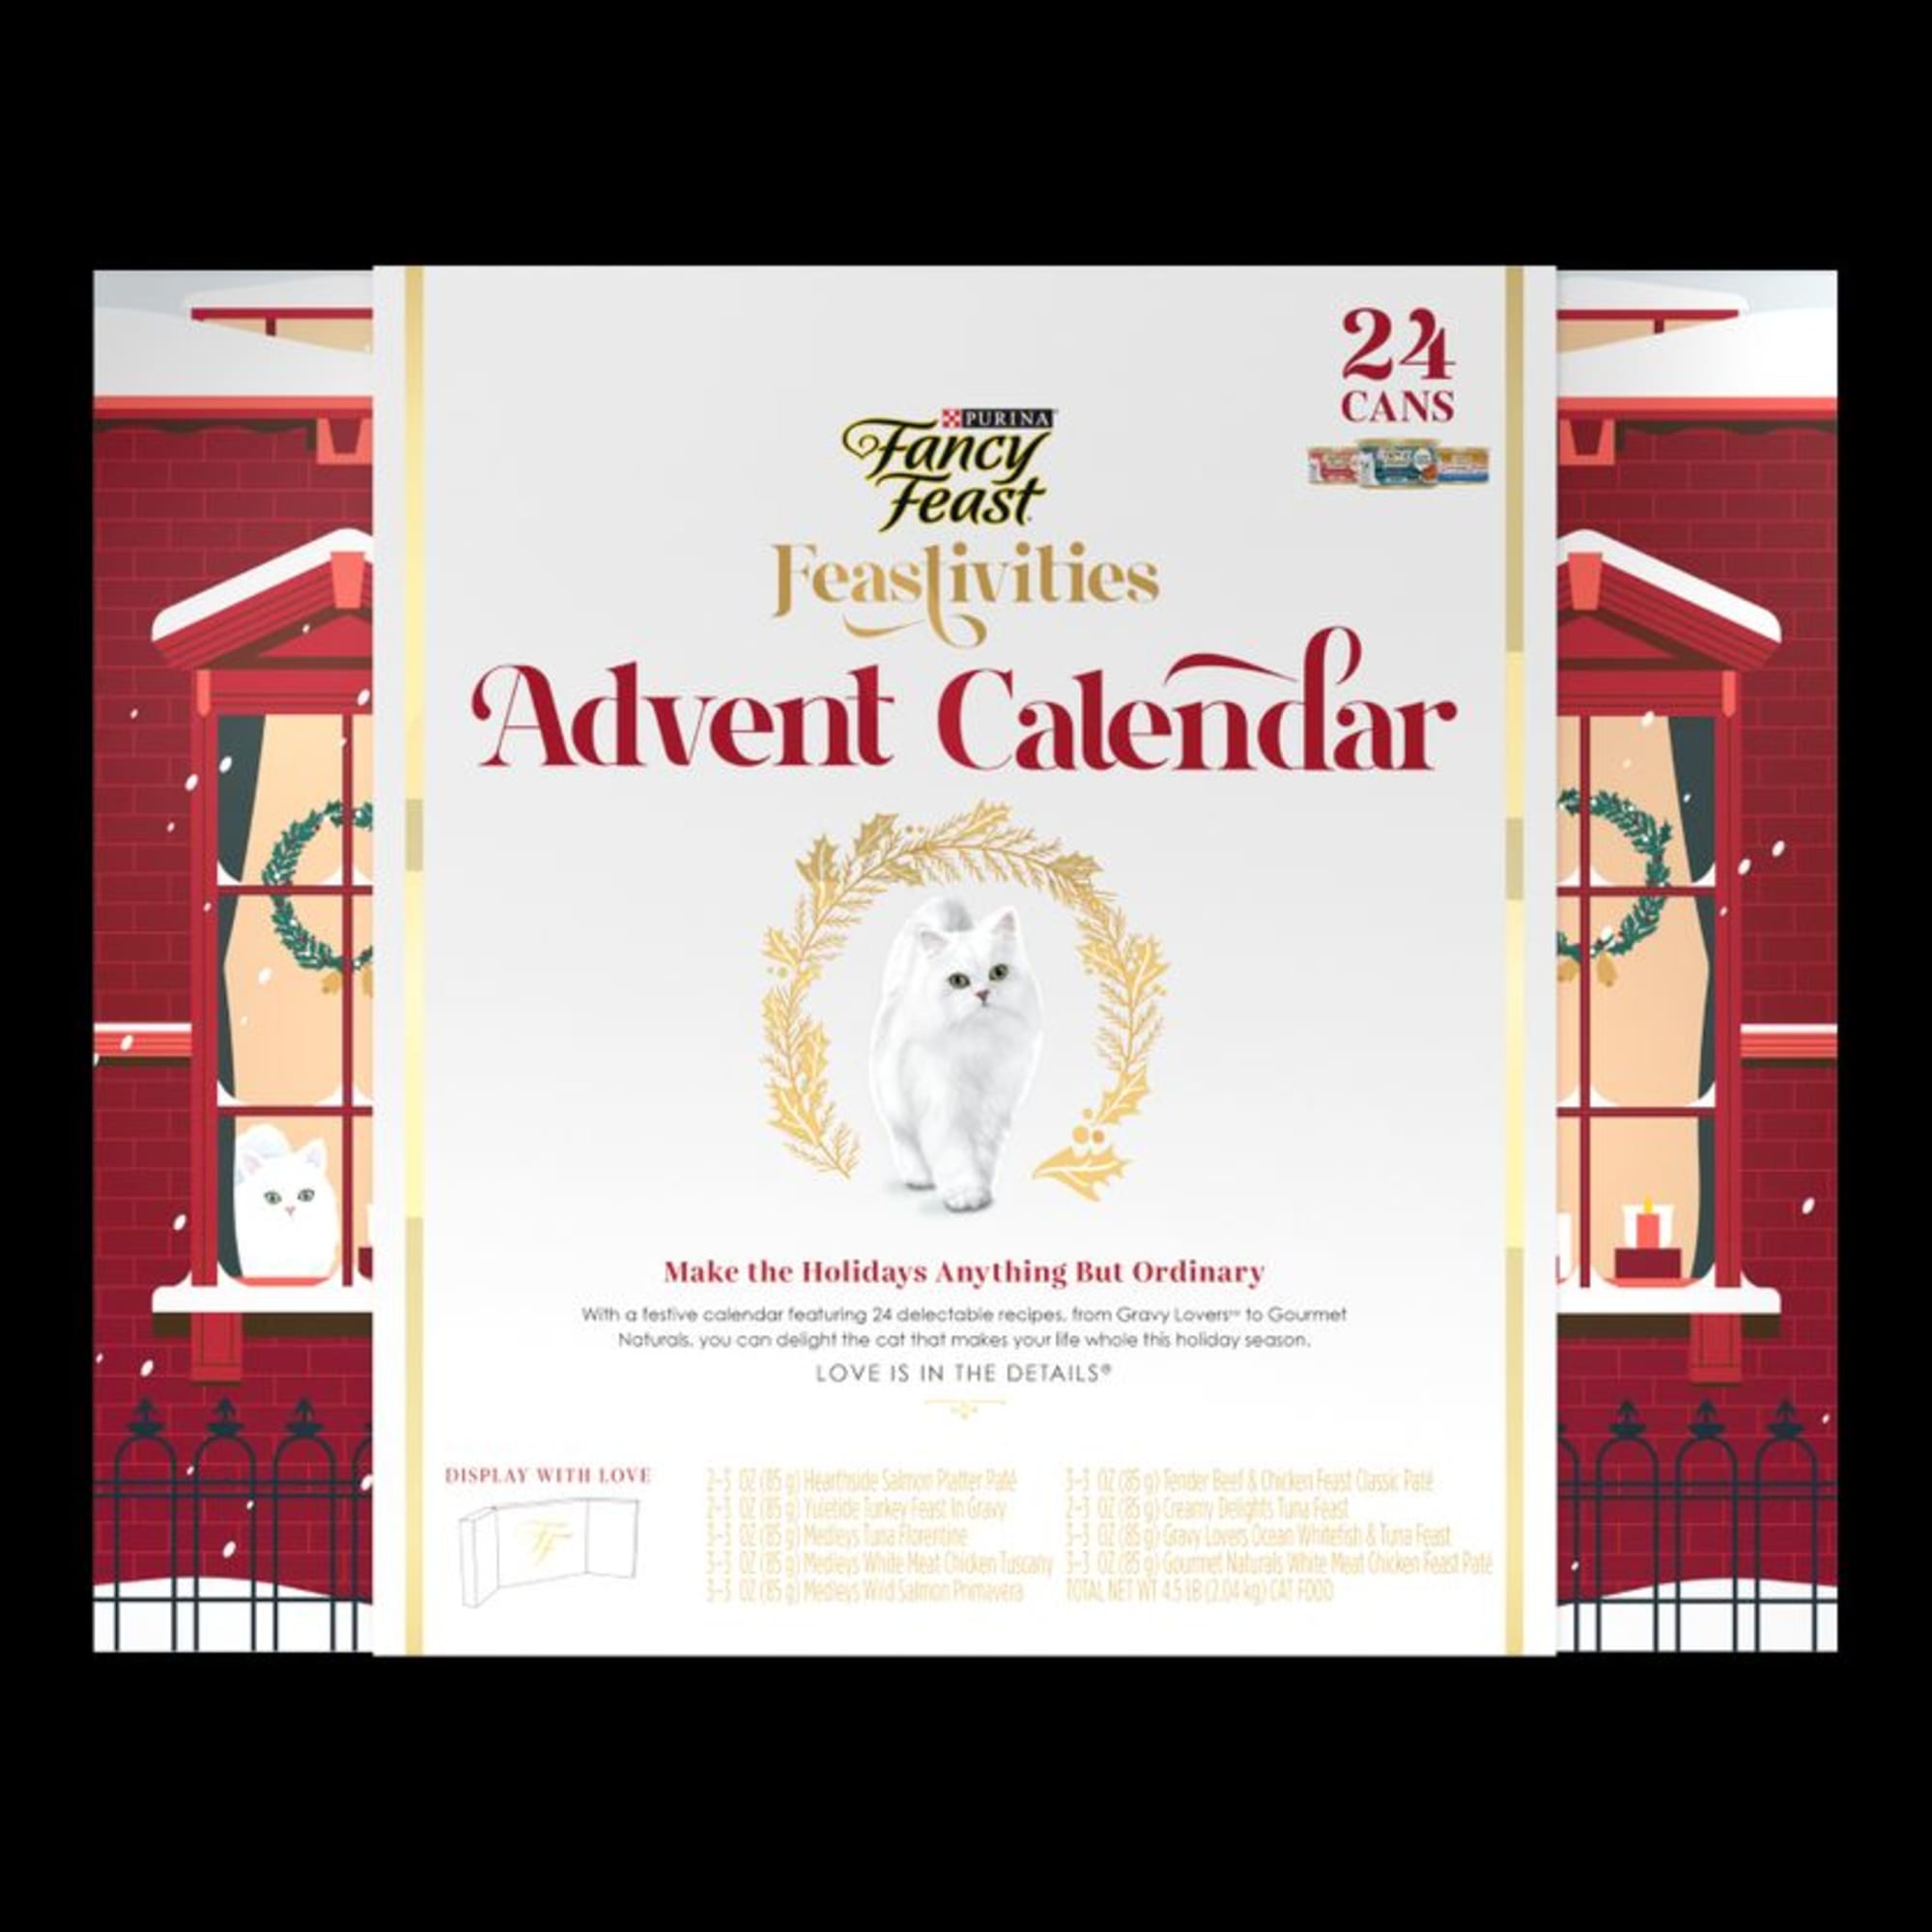 Fancy Feast has brought back their Advent Calendar for cats